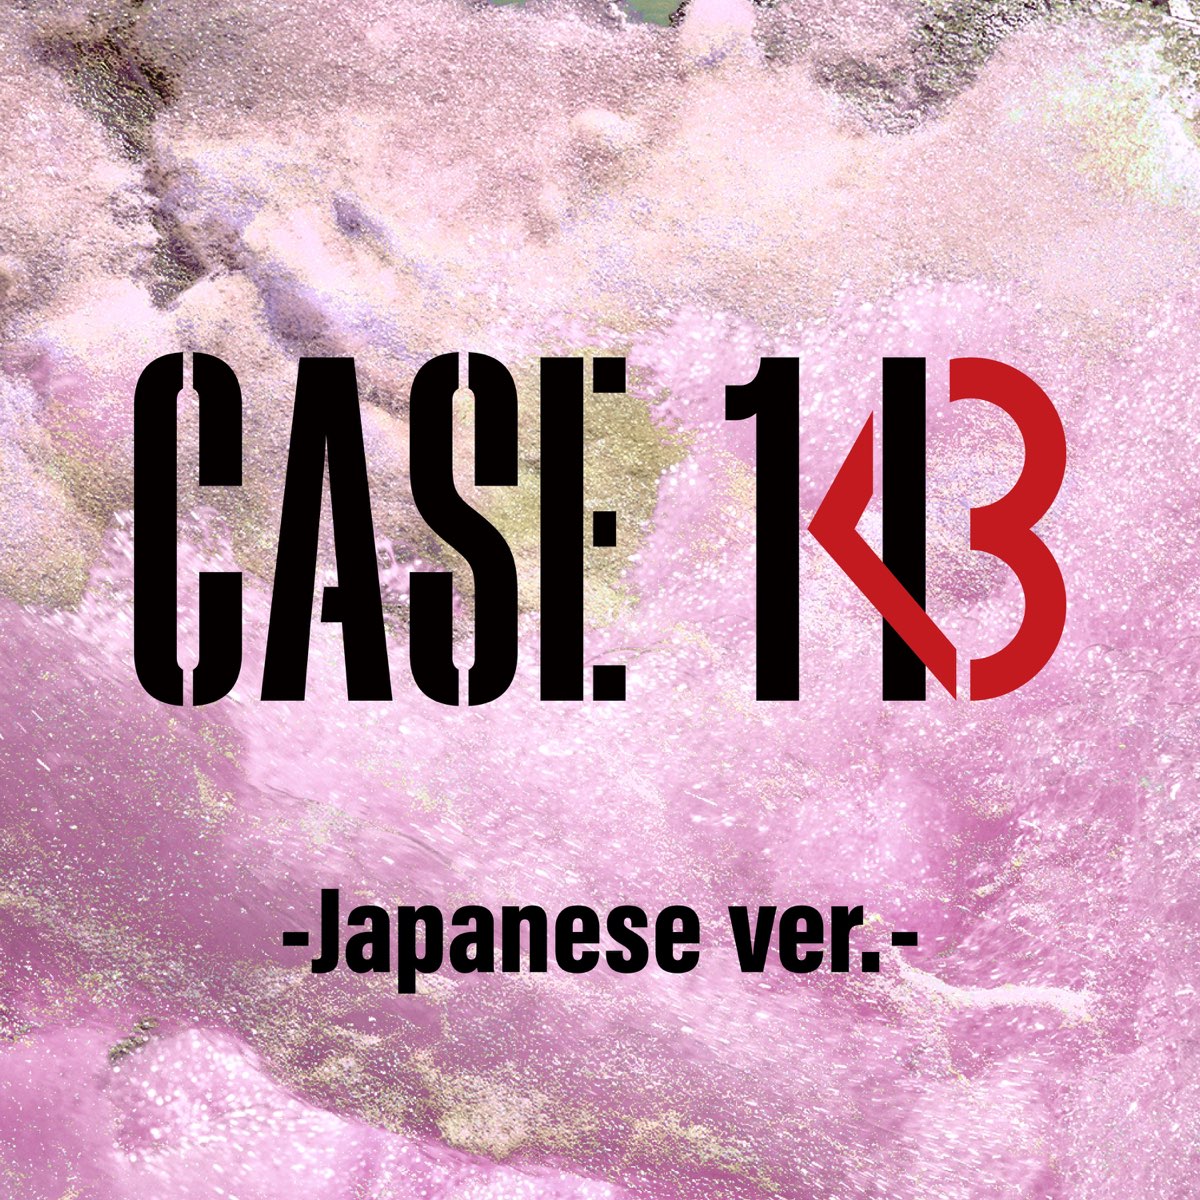 what is a case 143